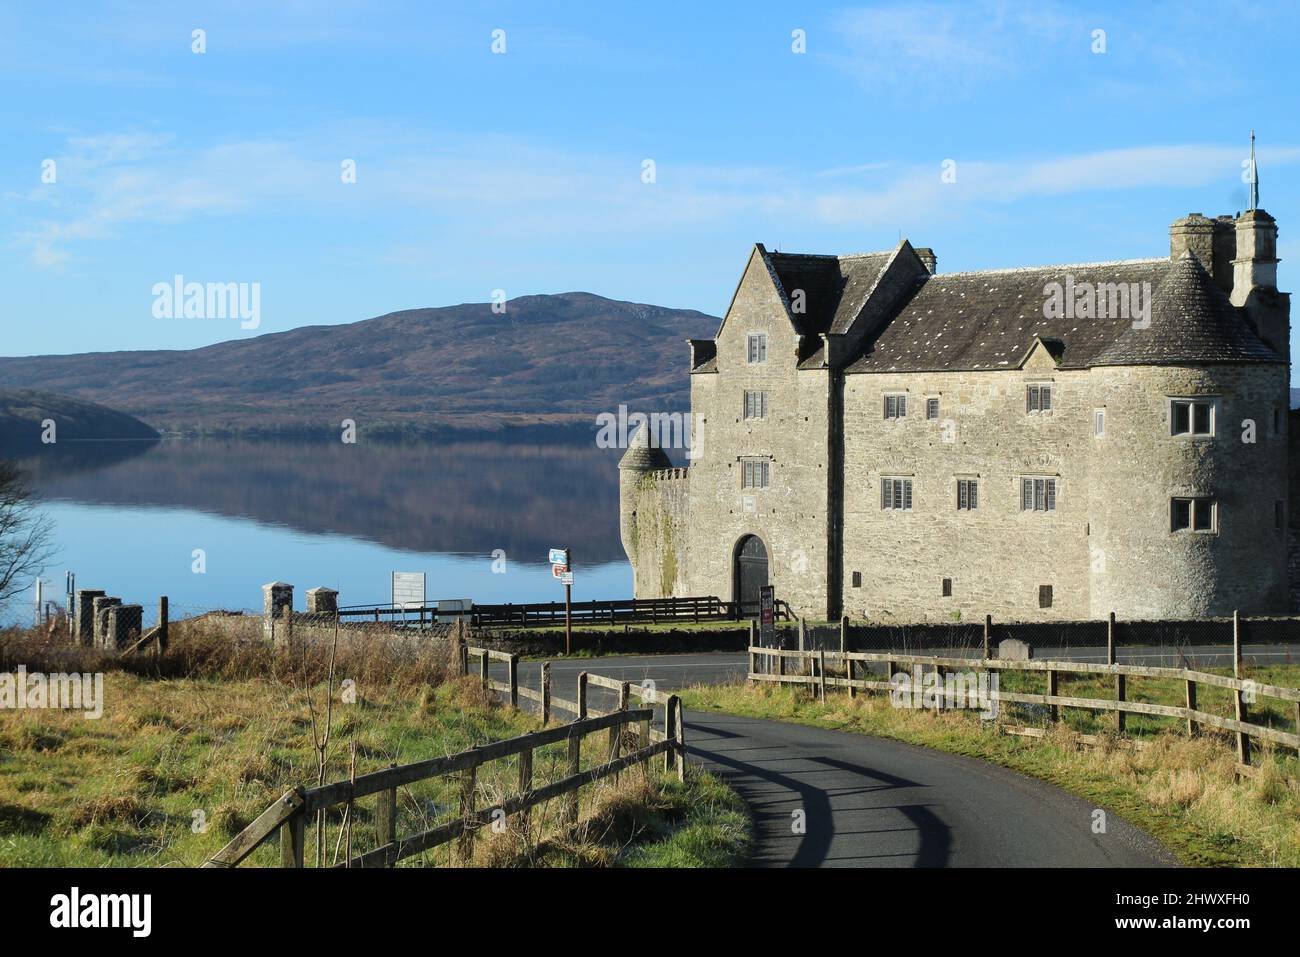 Landscape at Kilmore, County Leitrim, Ireland featuring Parke's Castle, a 17th century castle on shores of Lough Gill with Killery Mountain visible Stock Photo